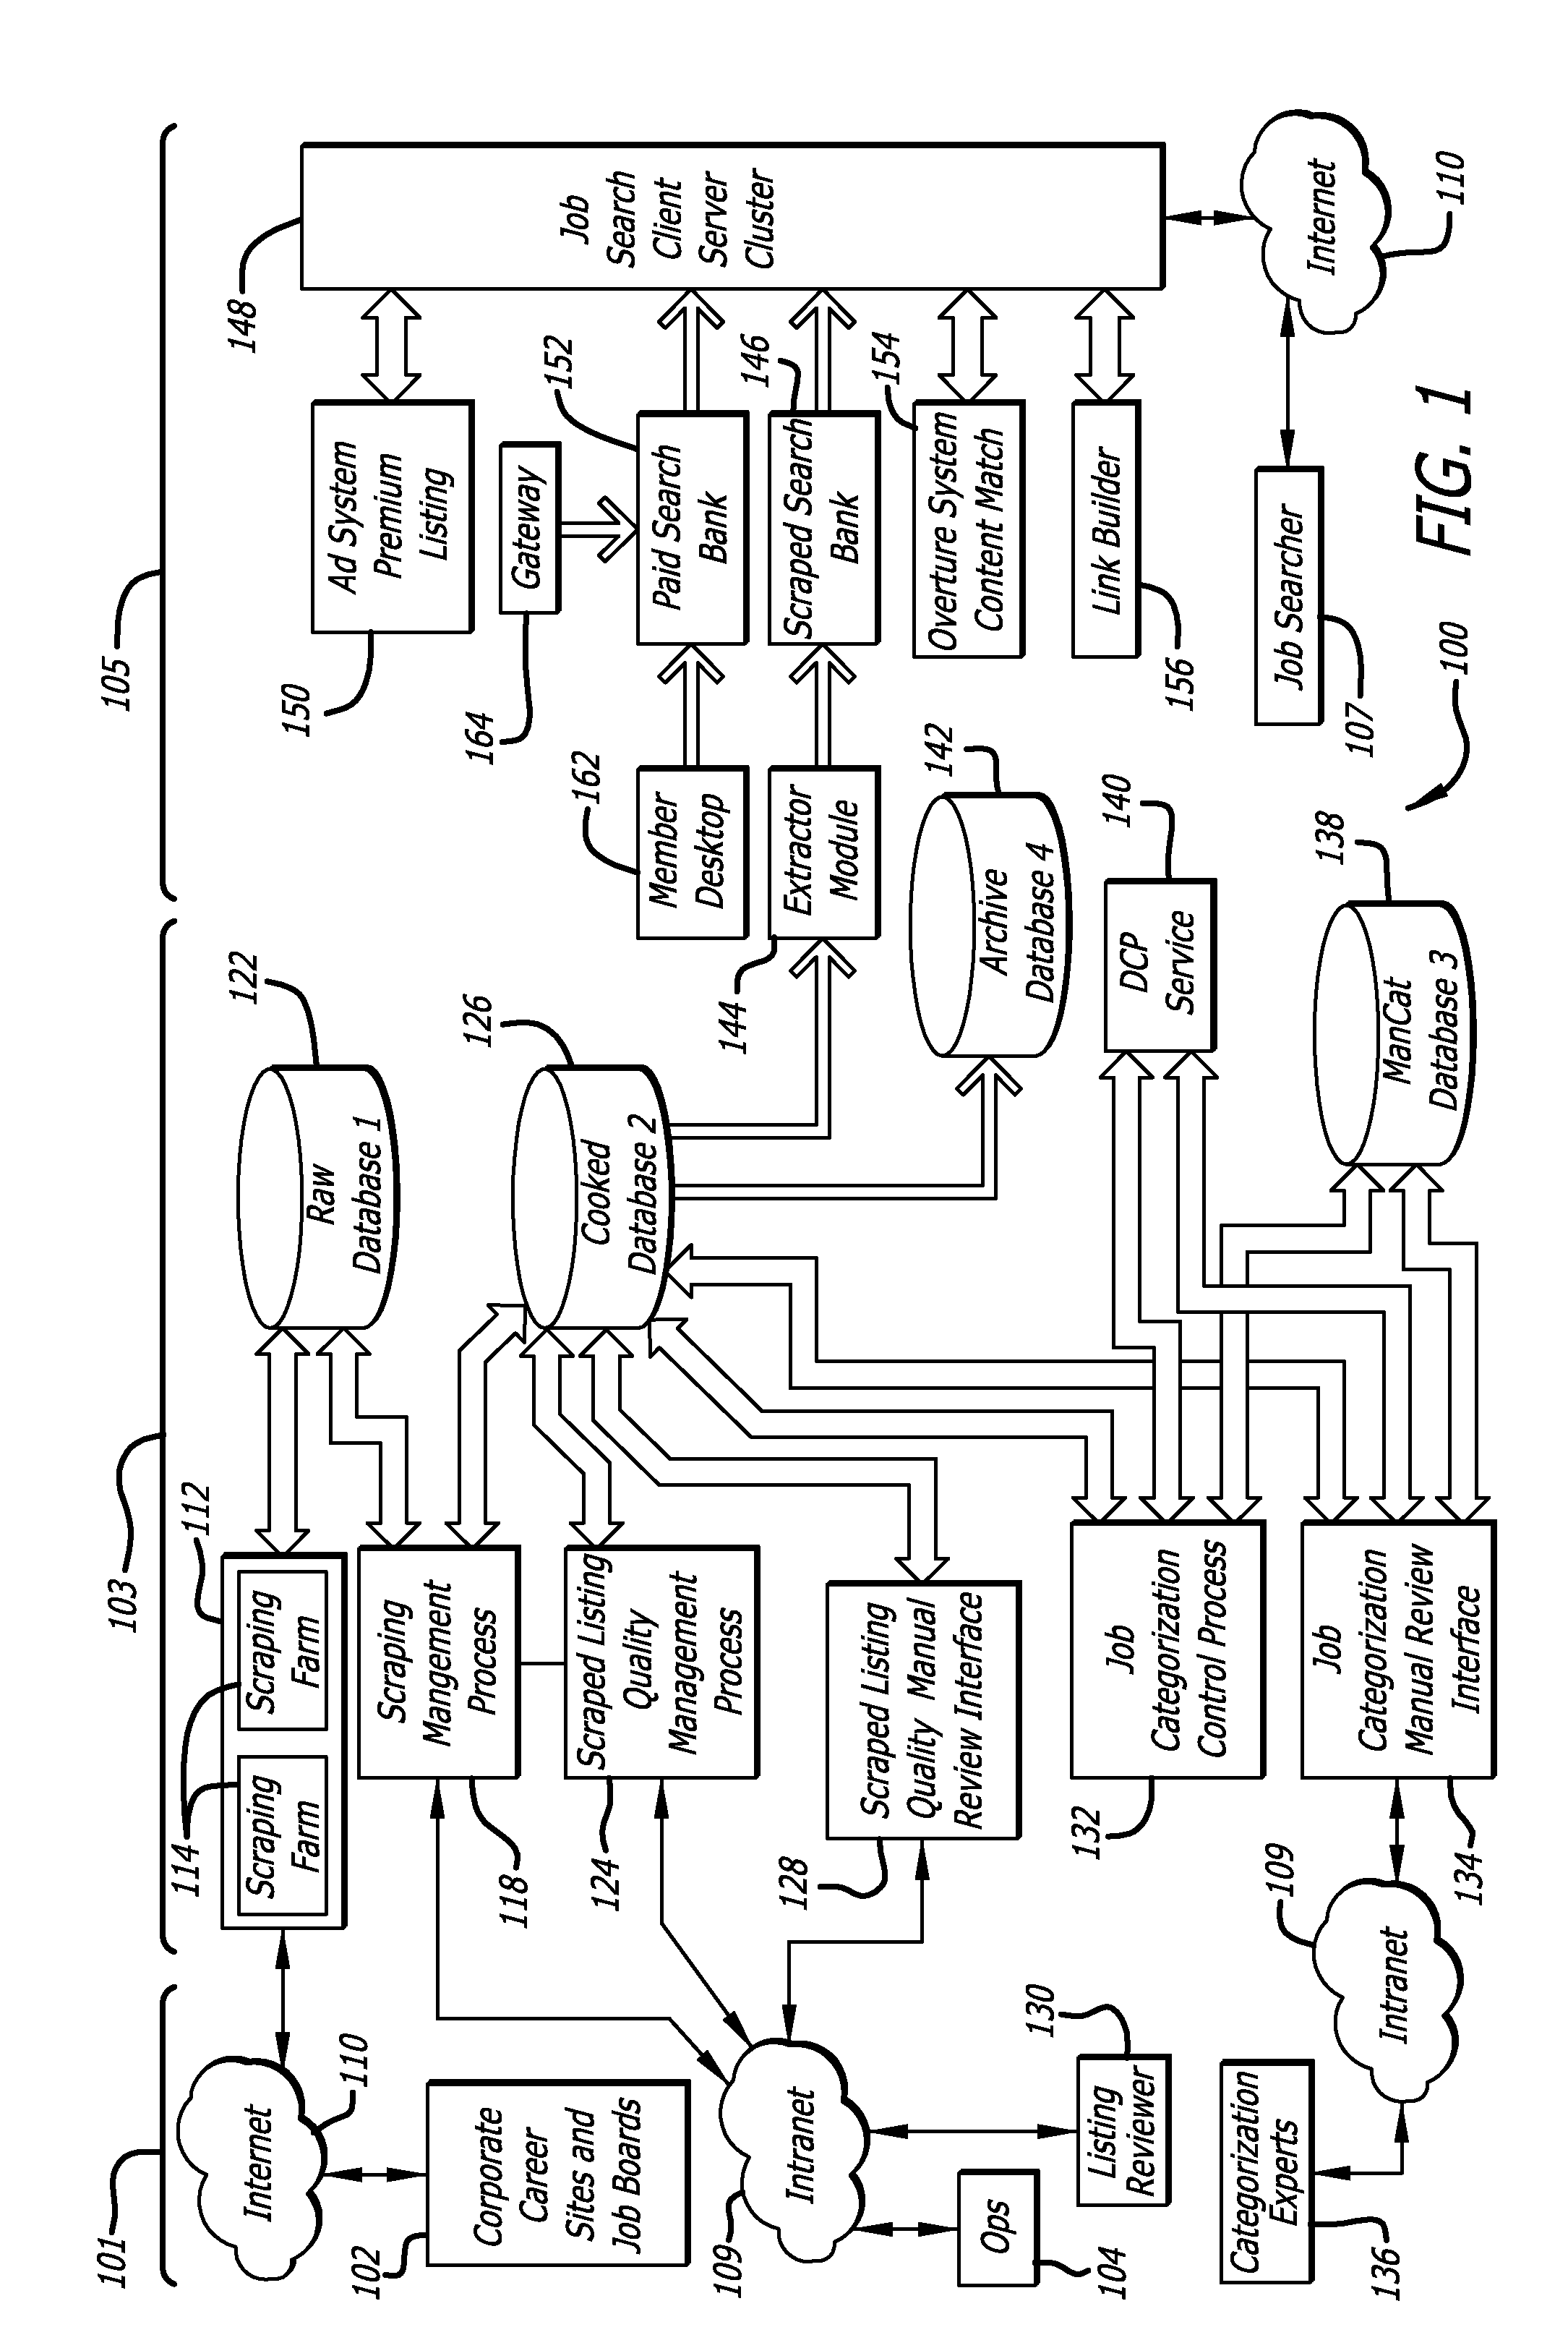 System and method for improved job seeking